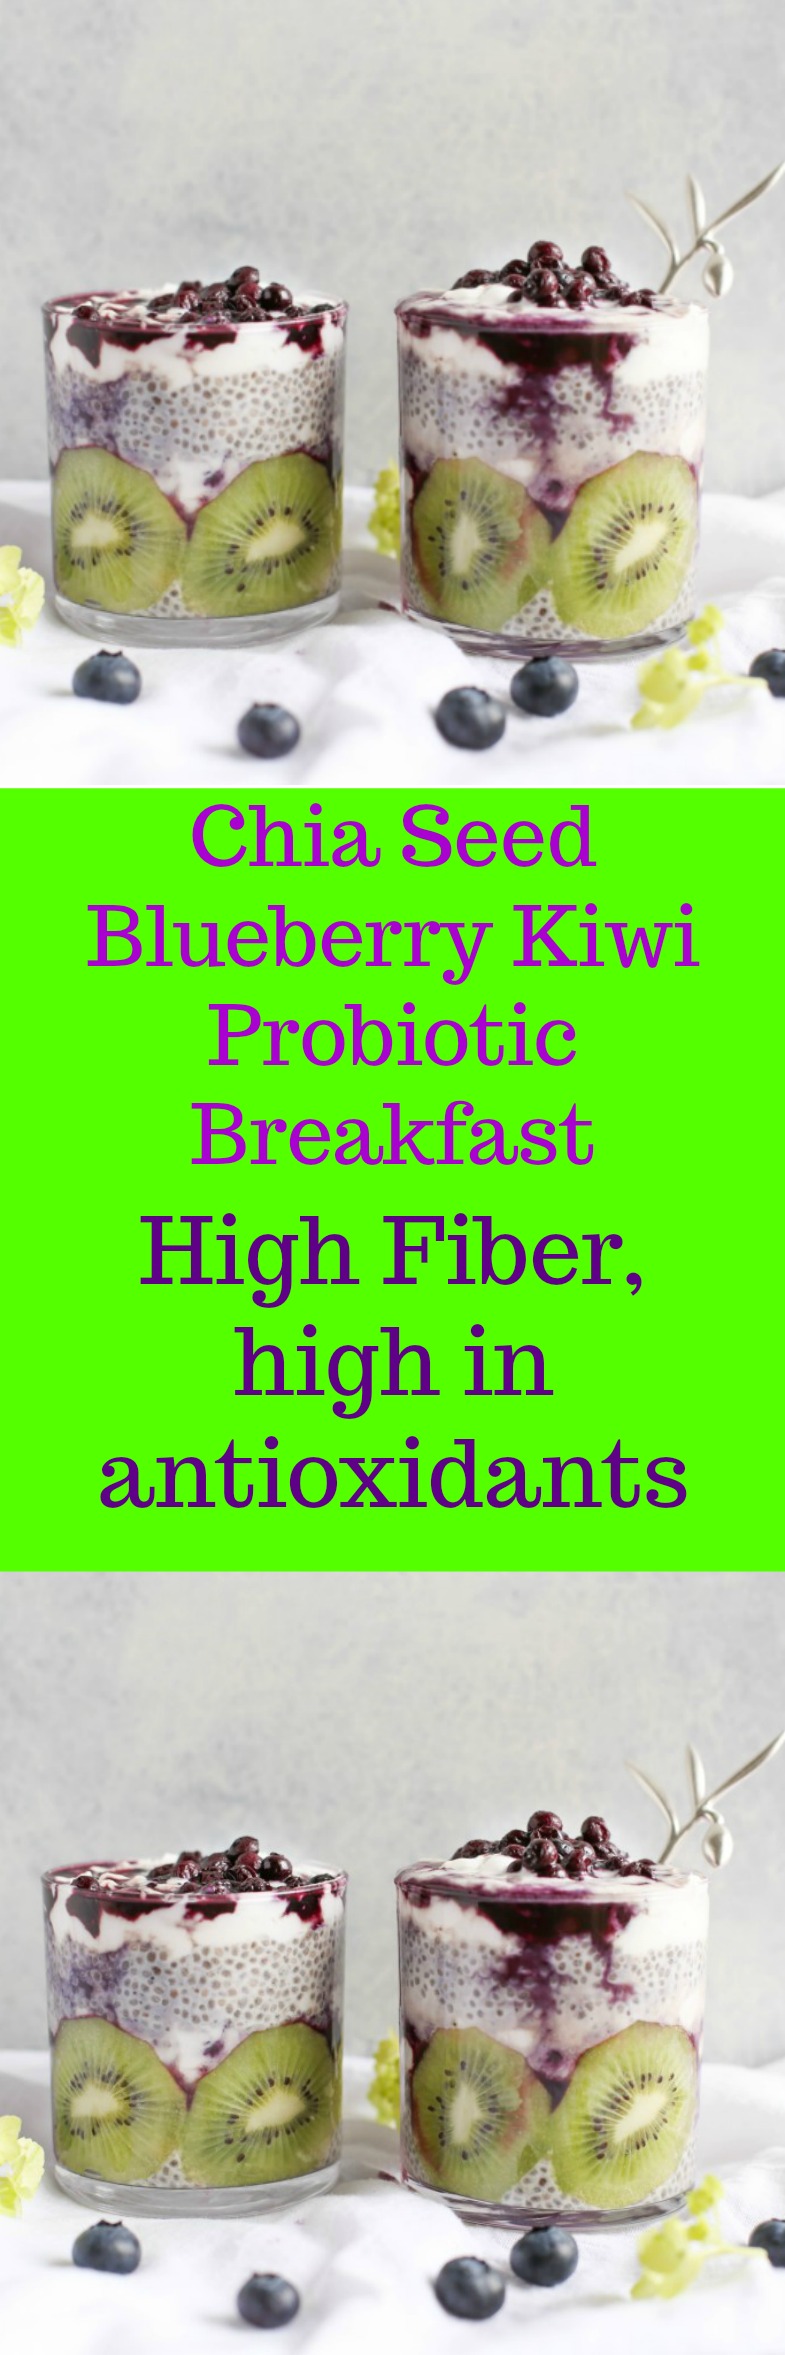 Power up your morning with this Chia Seed Blueberry Kiwi Probiotic Breakfast! Chi seed will fill you up and the probiotic yogurt will keep your digestive tract healthy